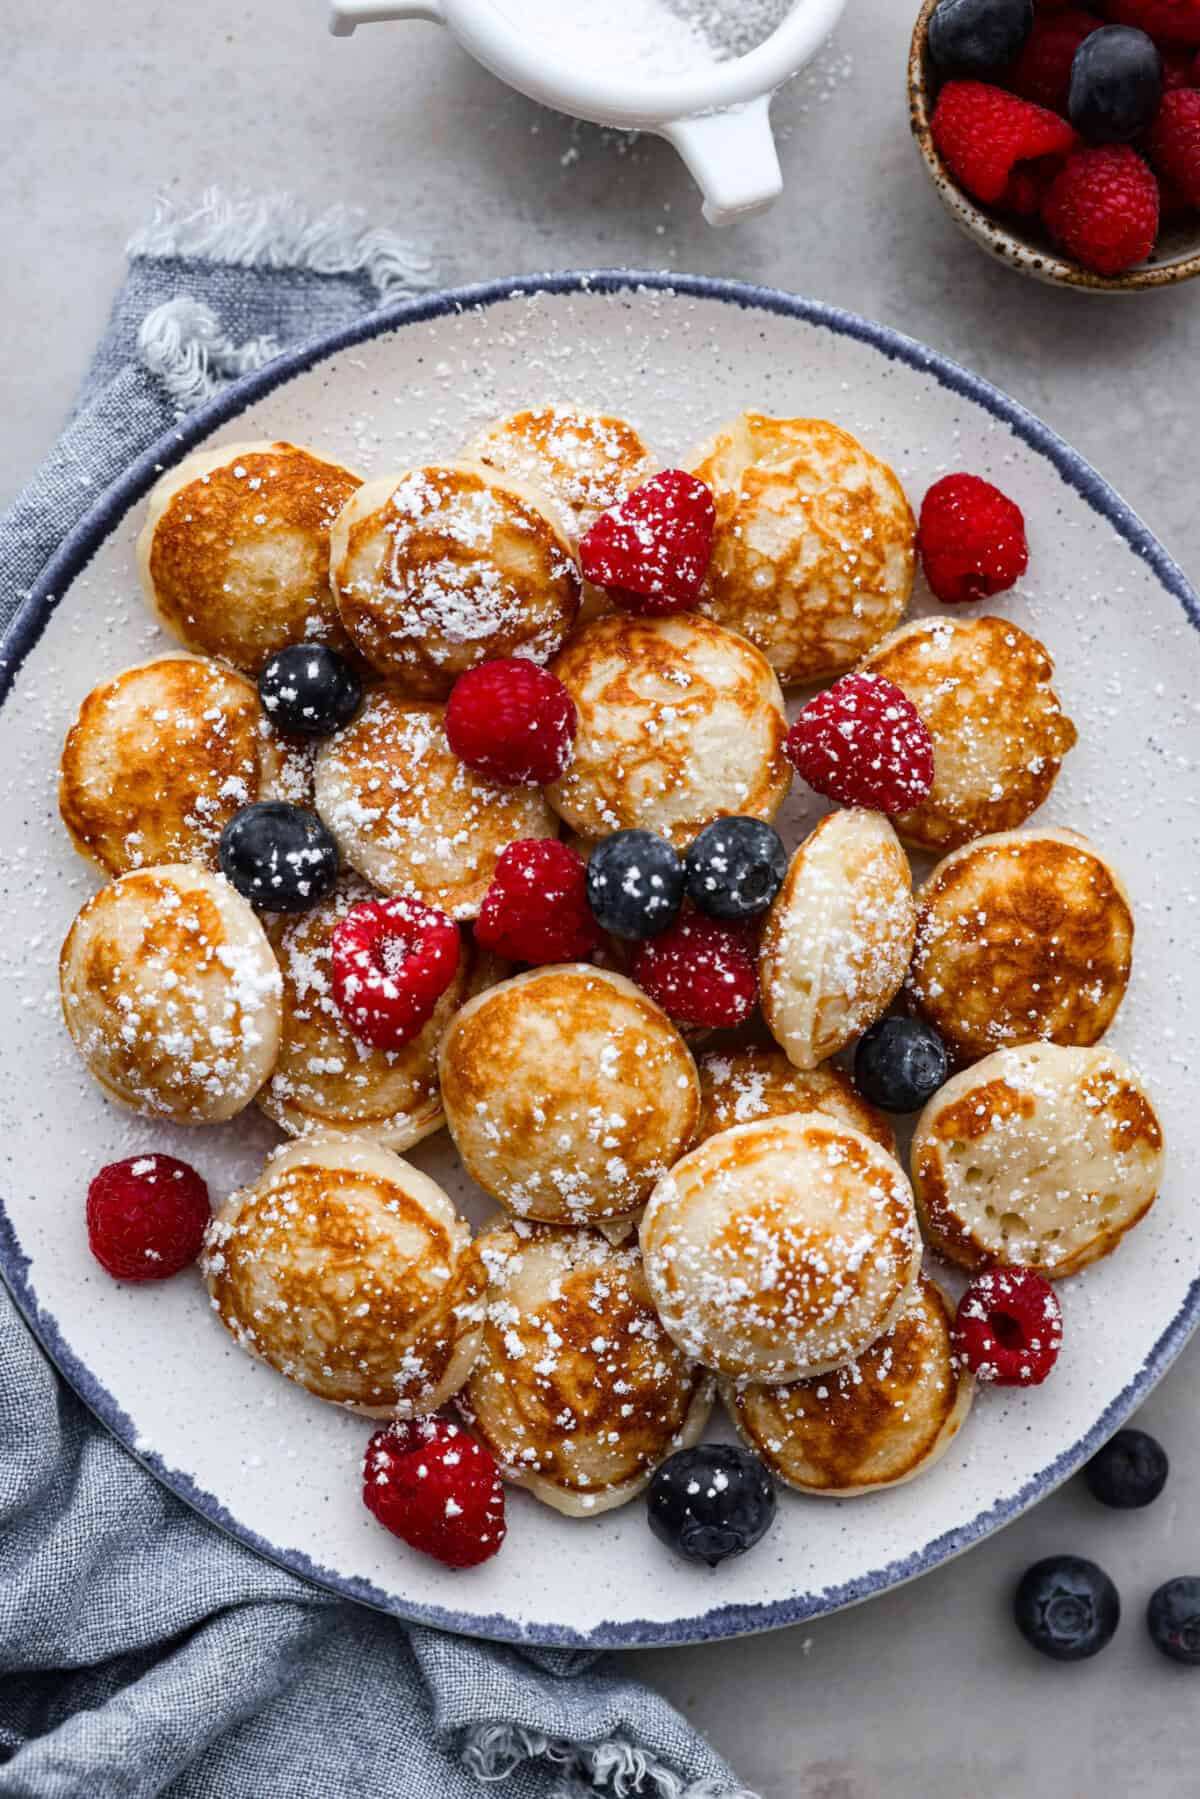 Poffertjes served with berries and a dusting of powdered sugar on a blue and white plate.